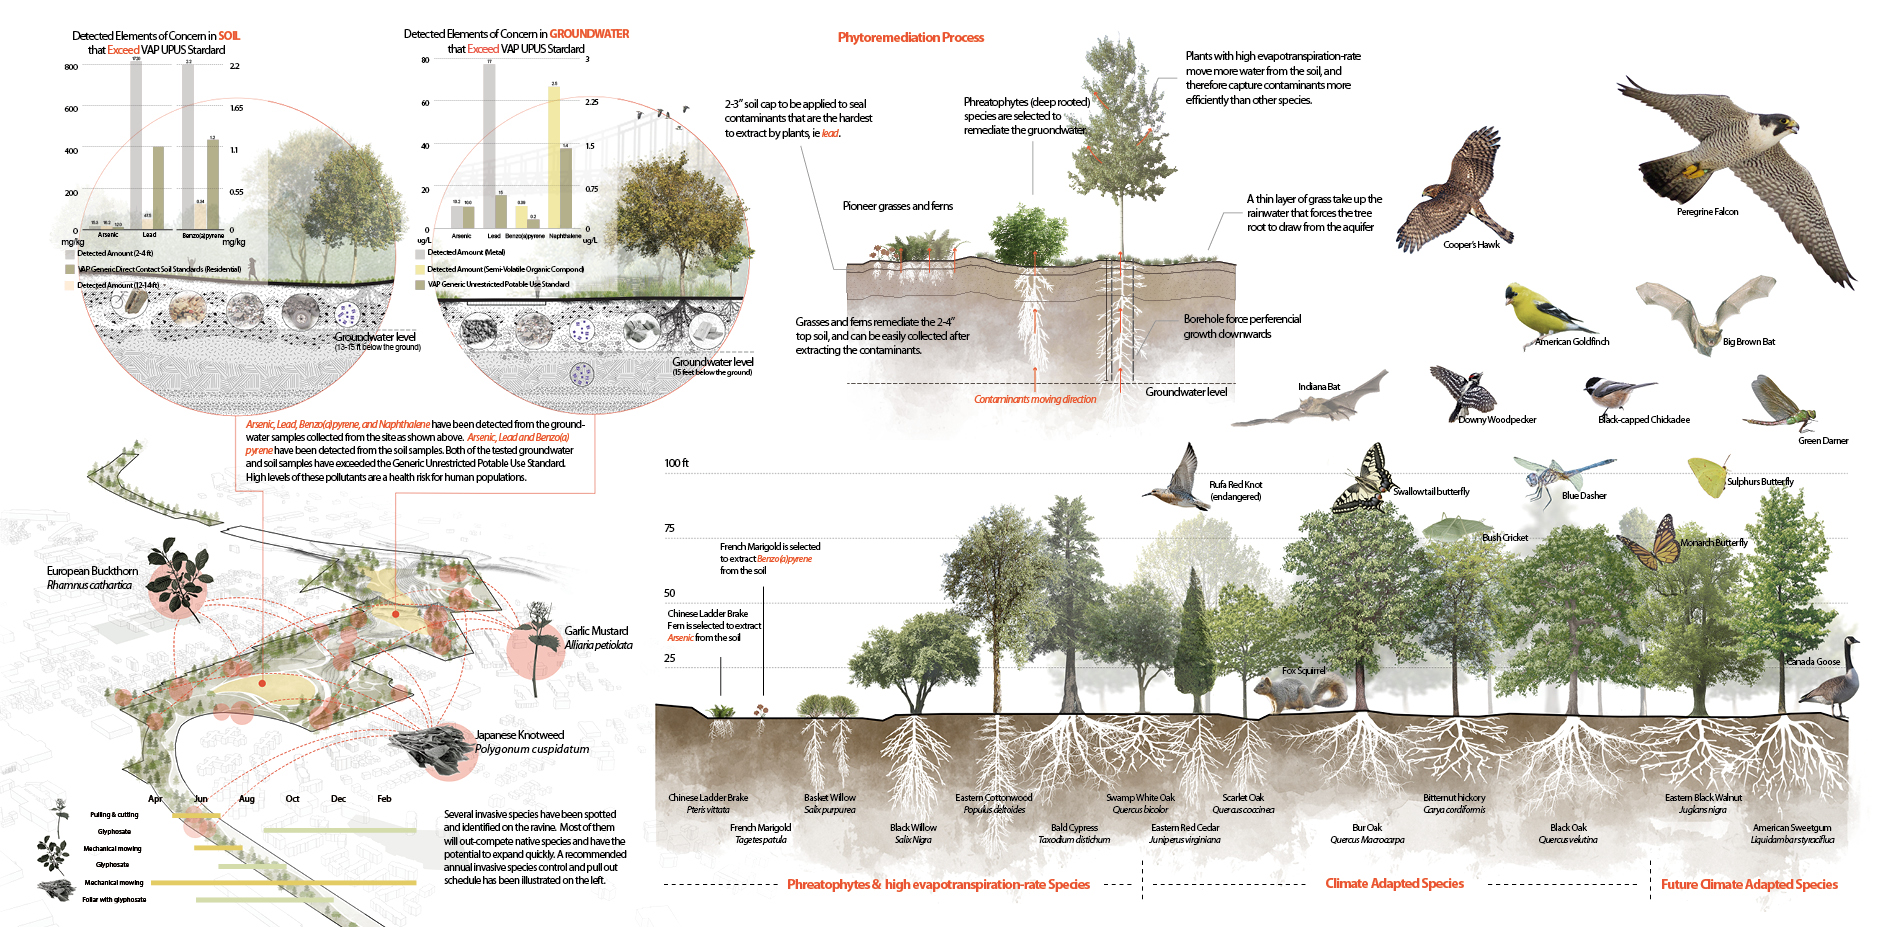 Phytoremediation and Climate adaptation strategy